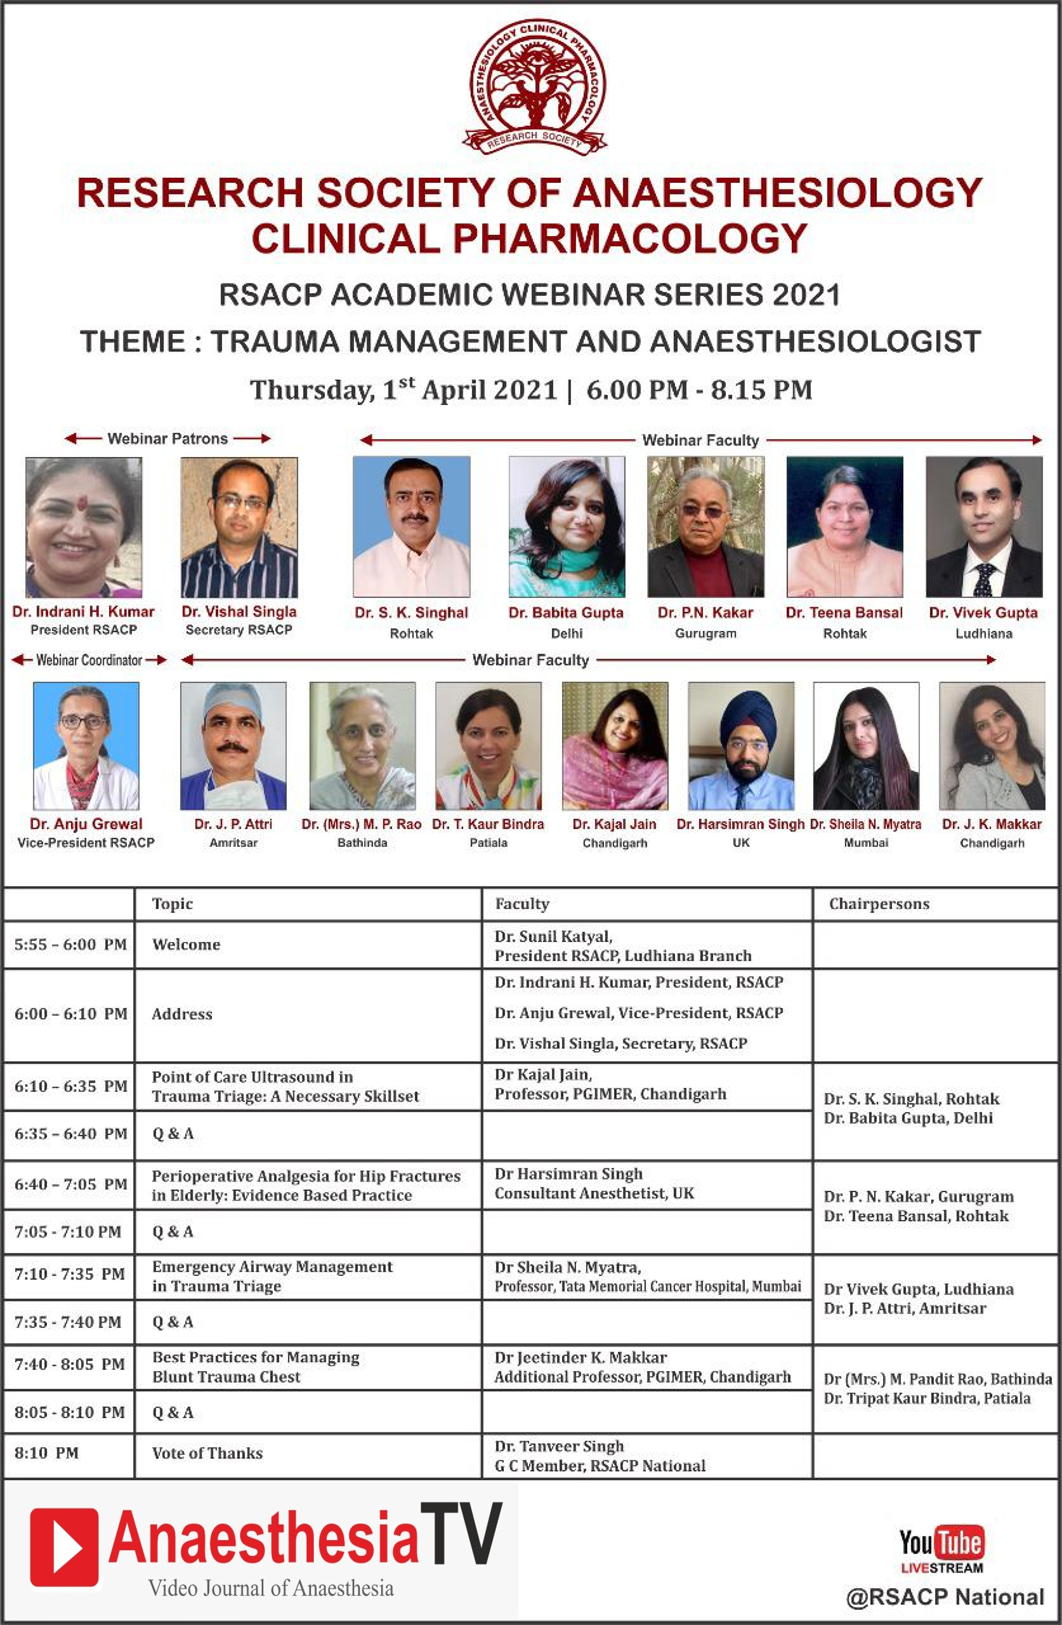 RSACP Present’s Webinar on TRAUMA MANAGEMENT AND ANAESTHESIOLOGIST